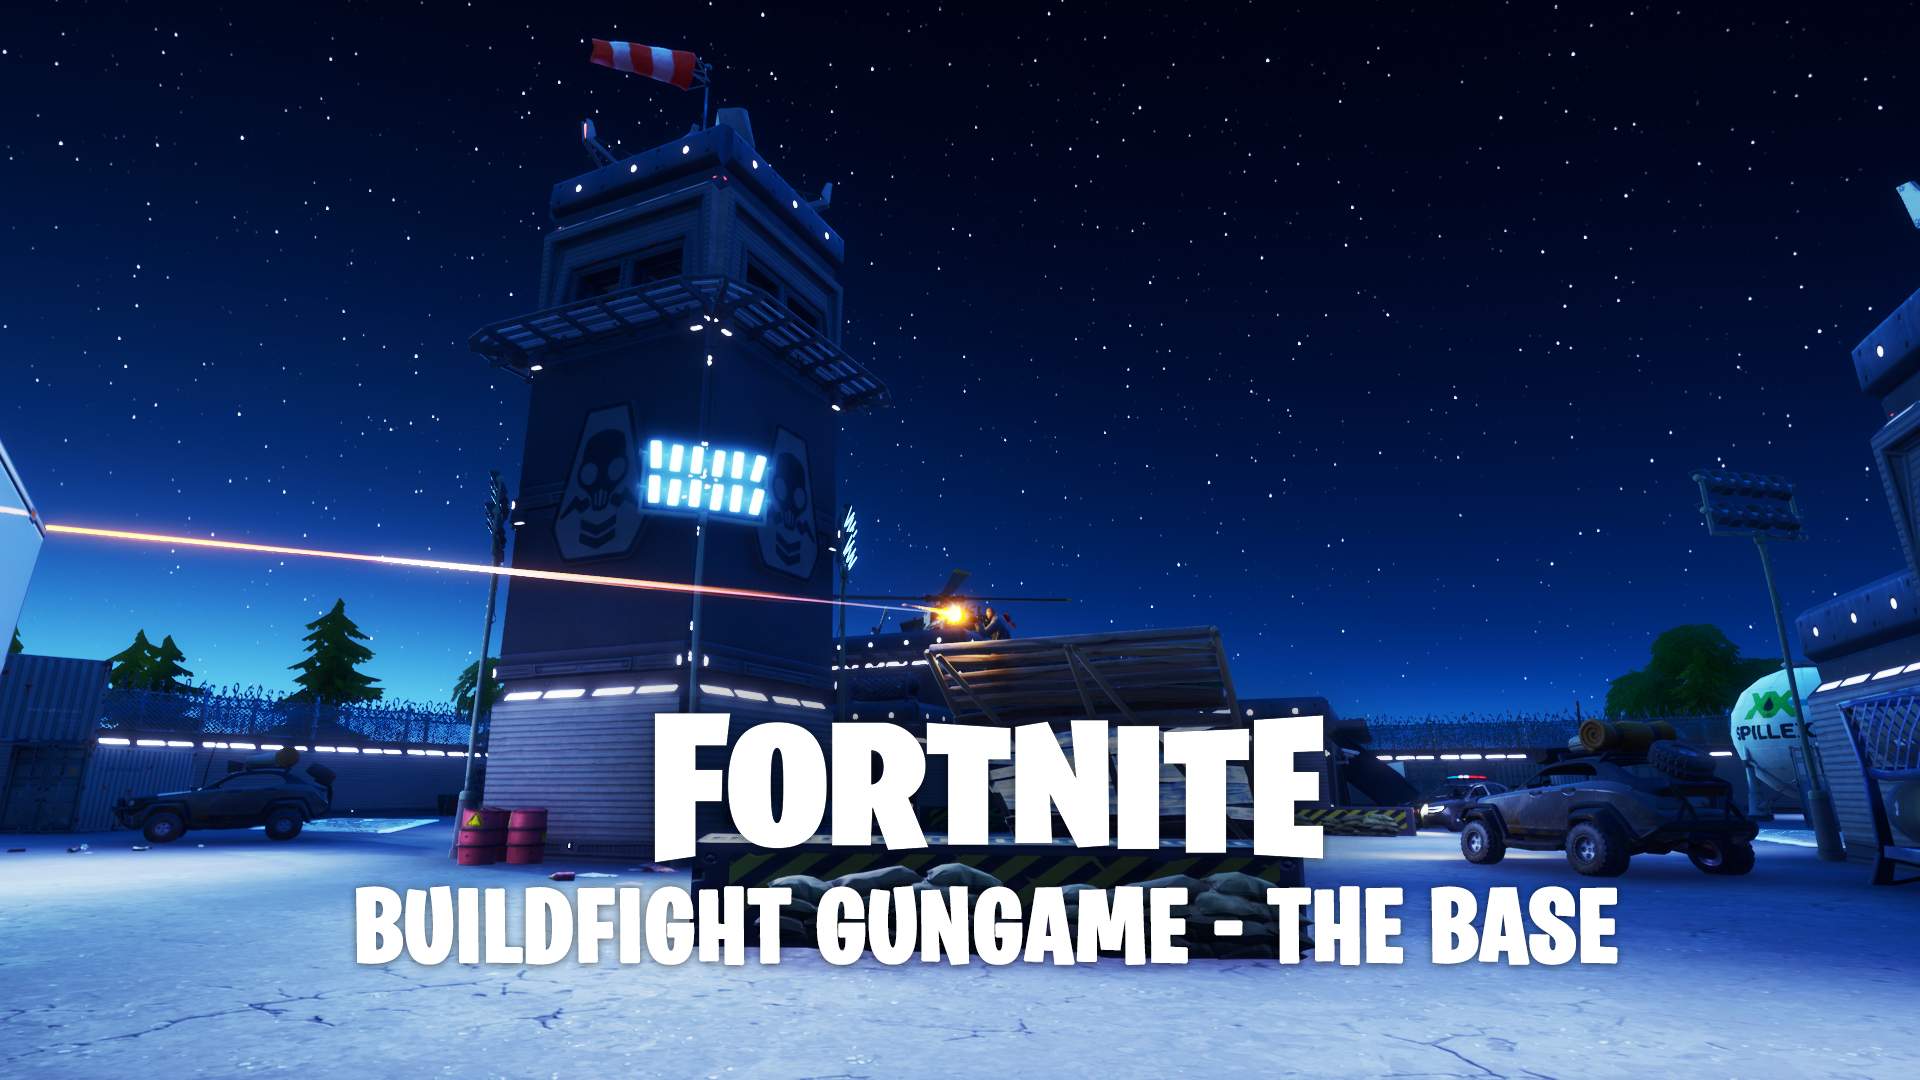 BUILDFIGHT GUNGAME: THE BASE